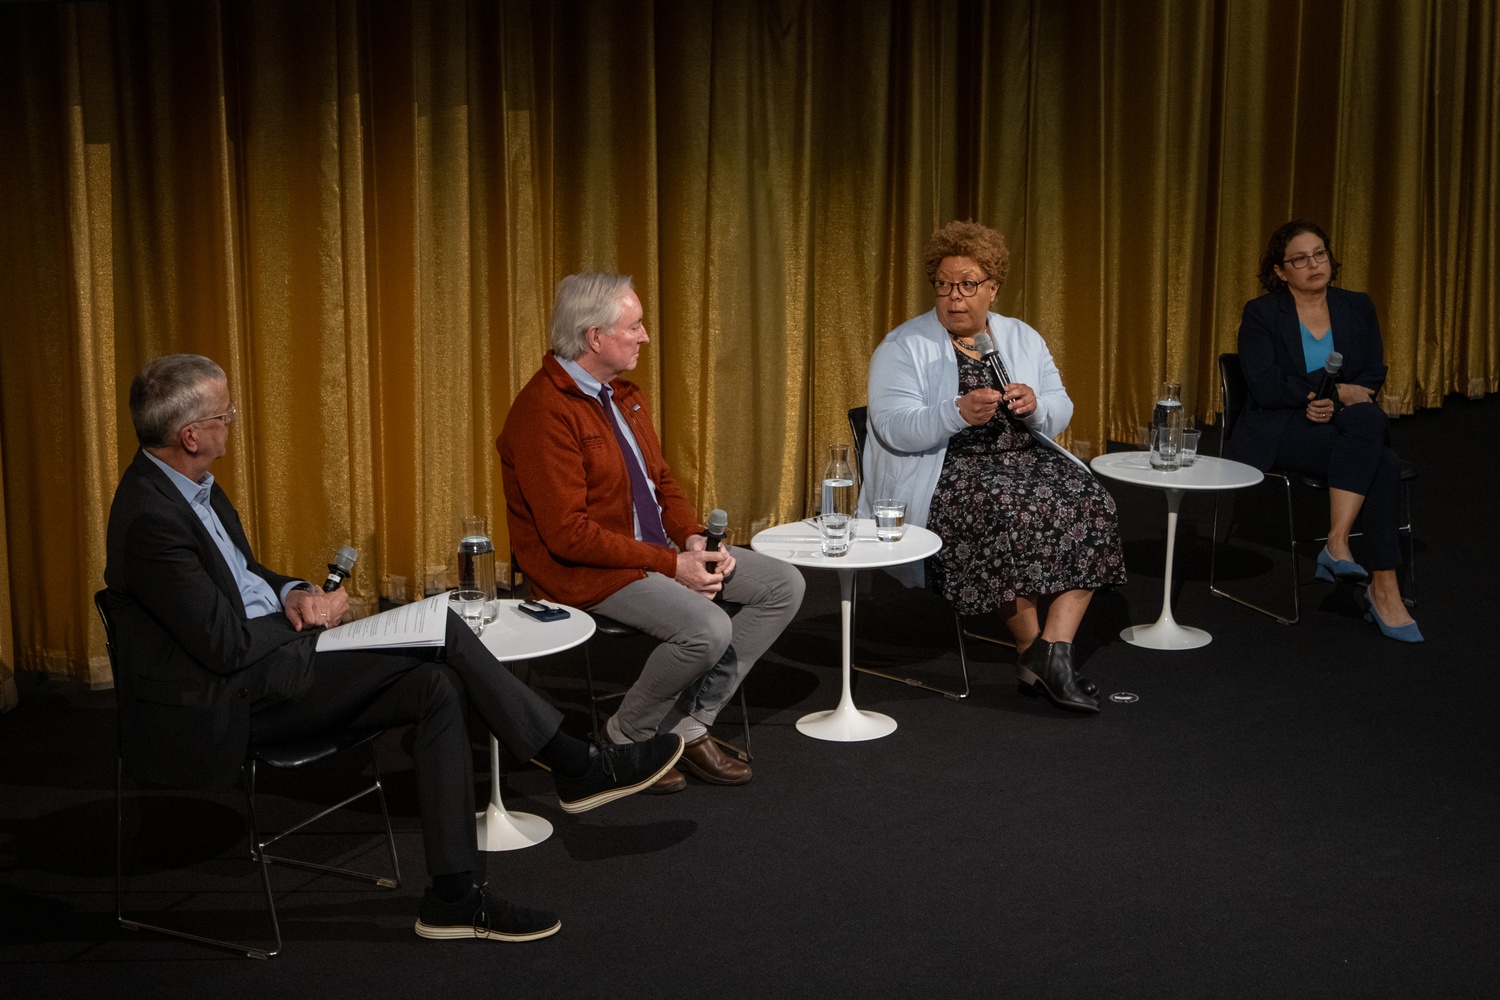 From left to right: Chris Herbert moderates a panel on homelessness and housing with Dr. Jim O'Connell, Peggy Bailey, and Dr. Margot Kushel. Kushel gave the Harvard Joint Center for Housing Studies' 23rd John T. Dunlop Lecture on Thursday.